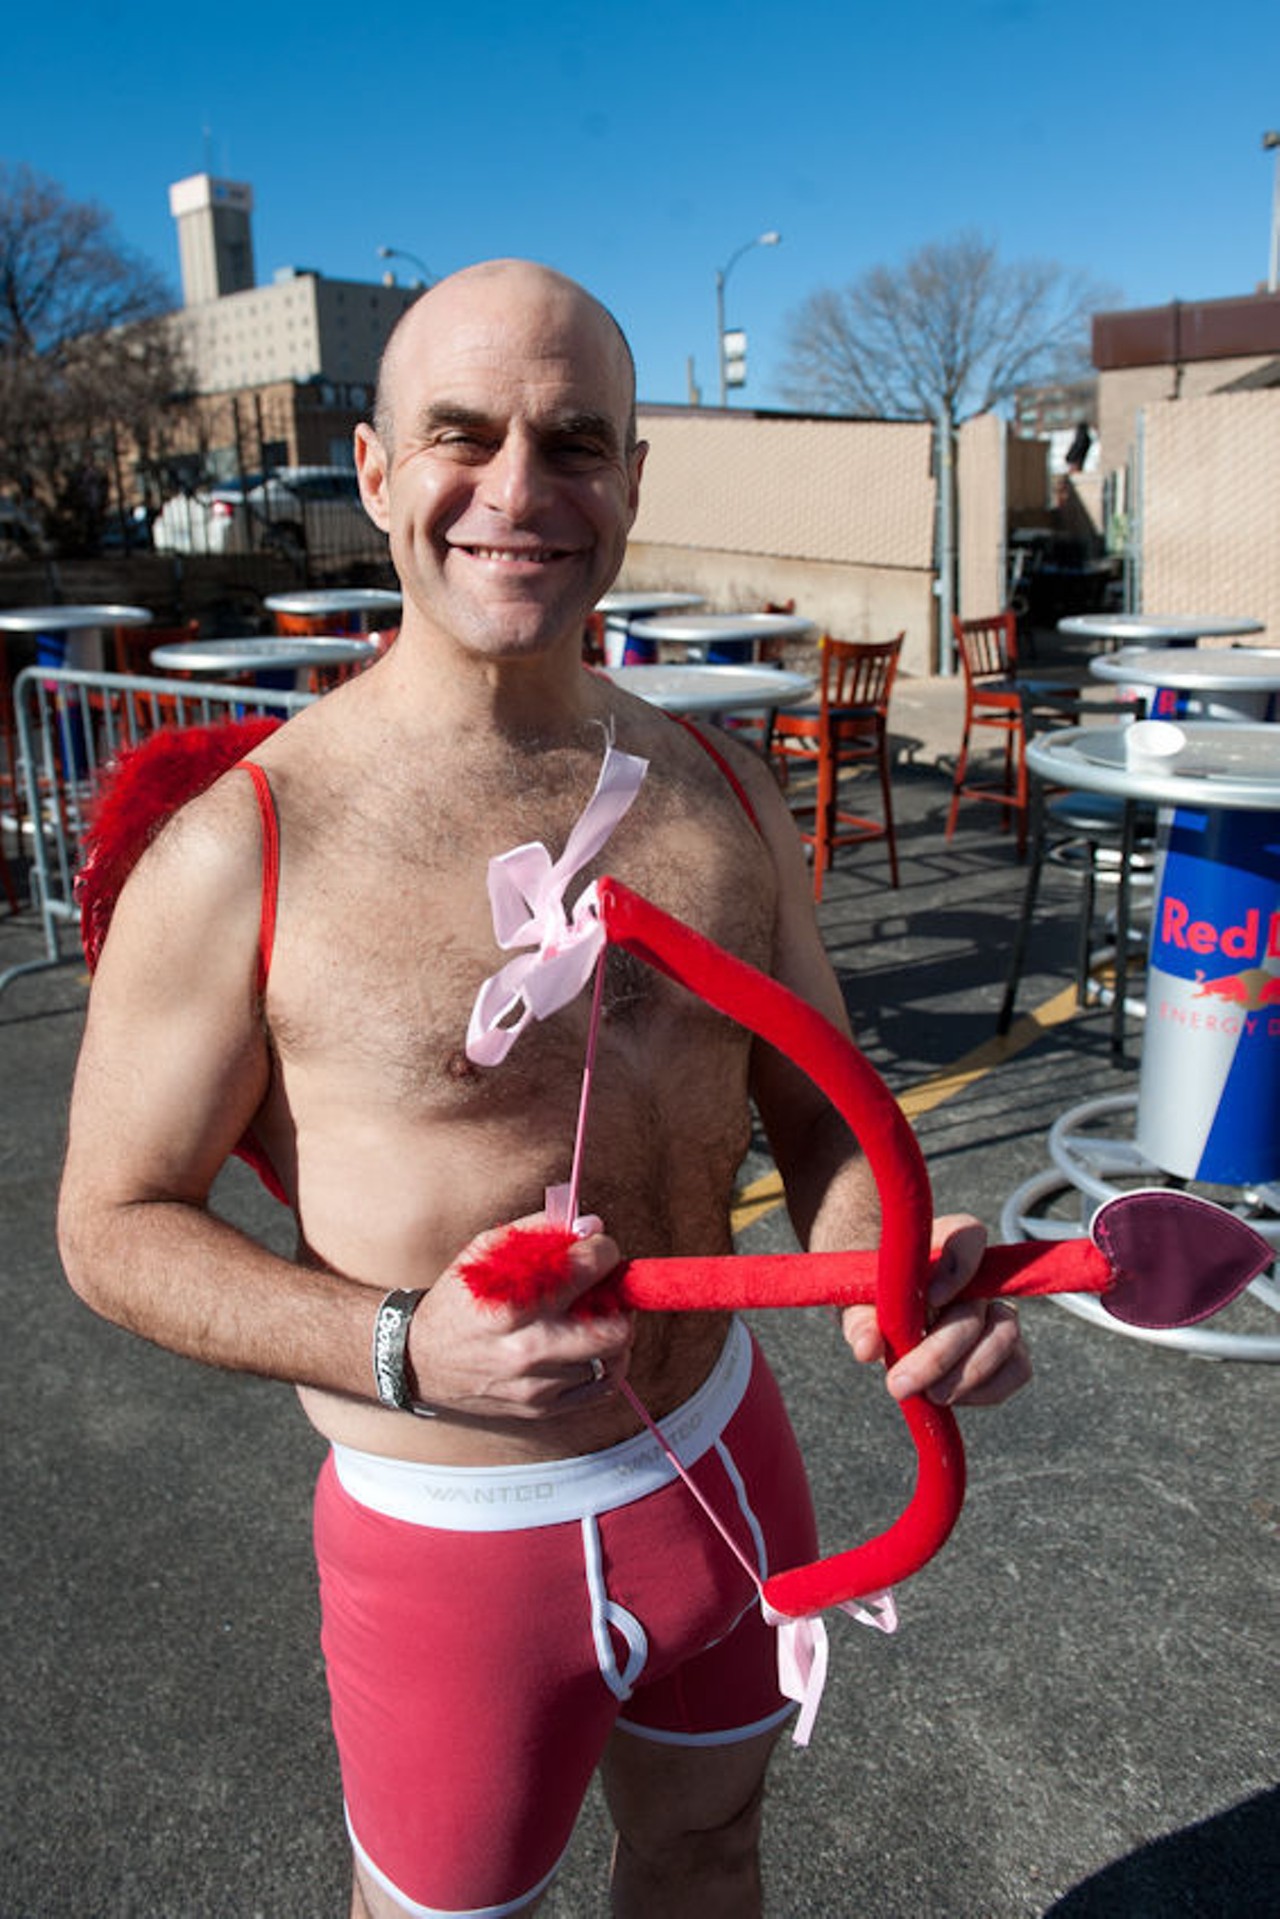 From our 2013 Cupid's Undie Run in St. Louis slideshow, February 16. By Jon Gitchoff.